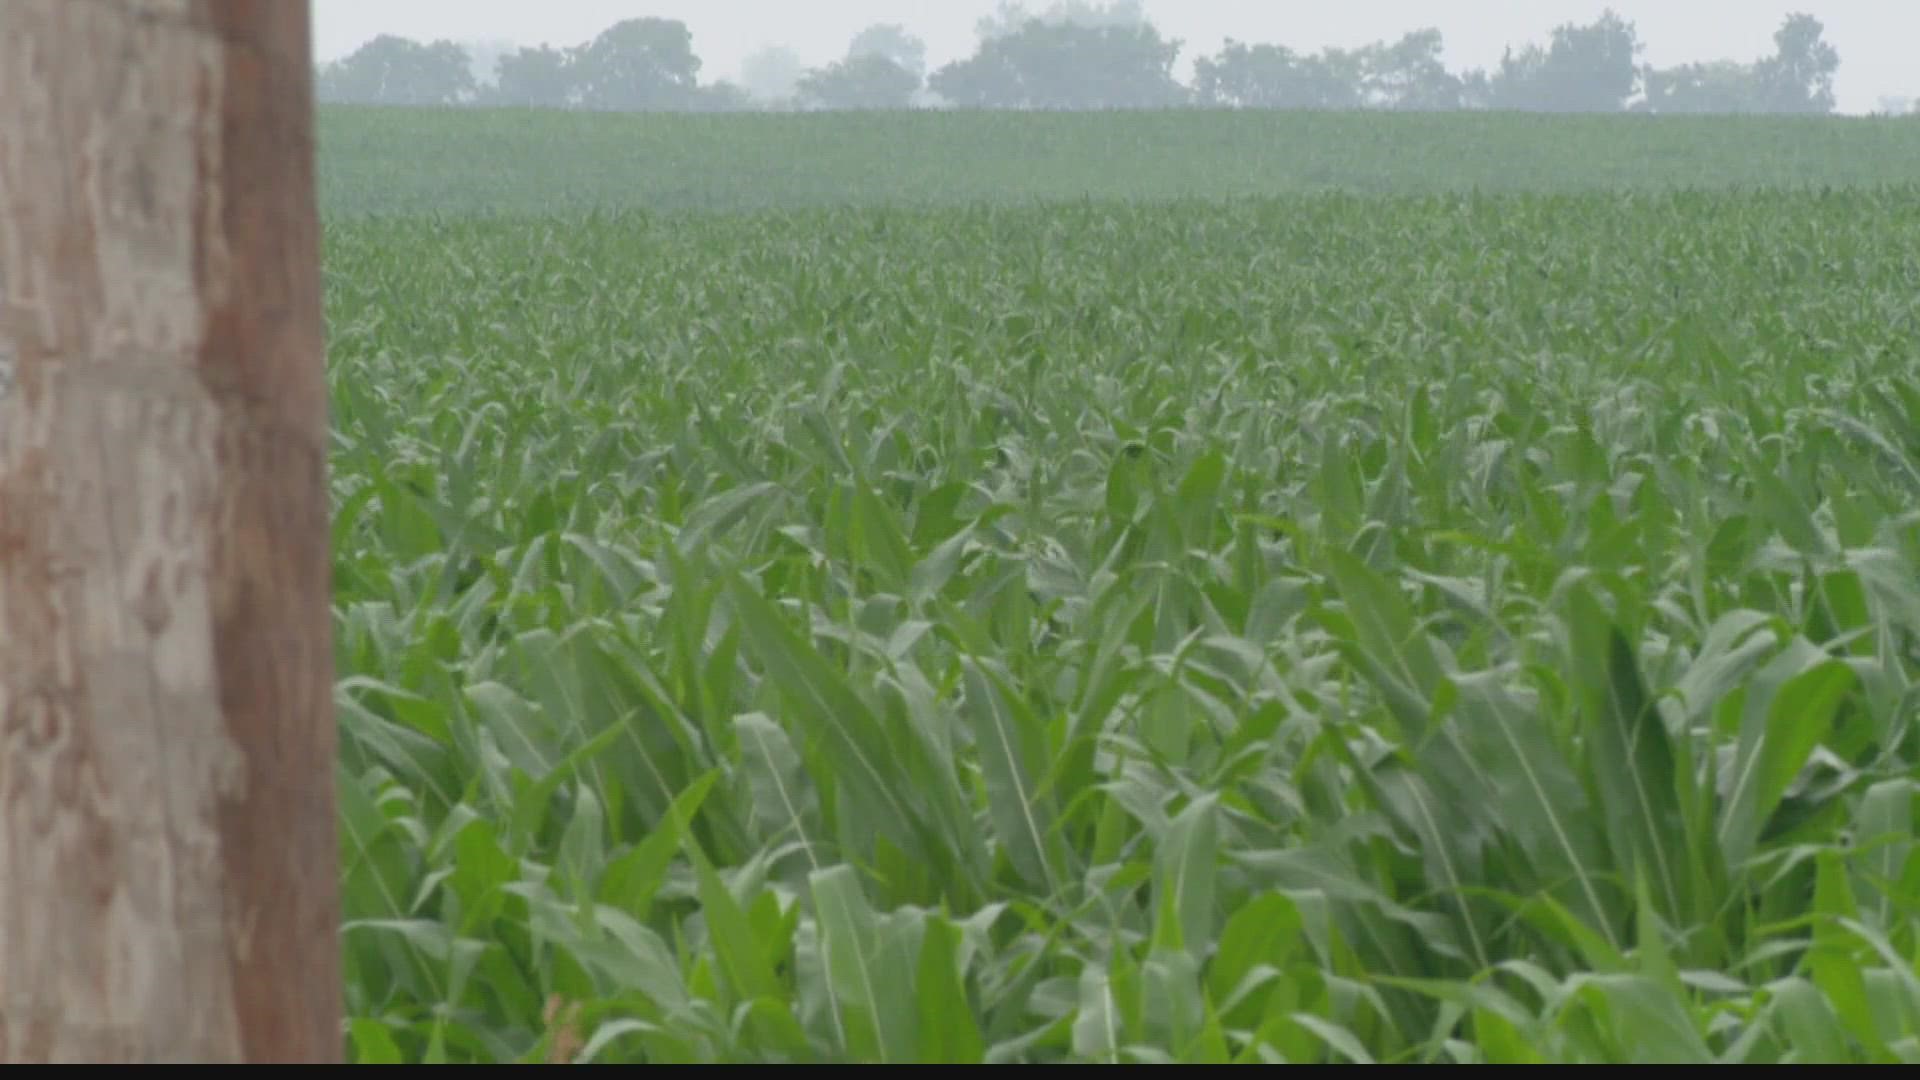 Dustin Grove takes a look at whether this week's rain is enough to save Indiana farmers' crops and the impact it could have on all of us.